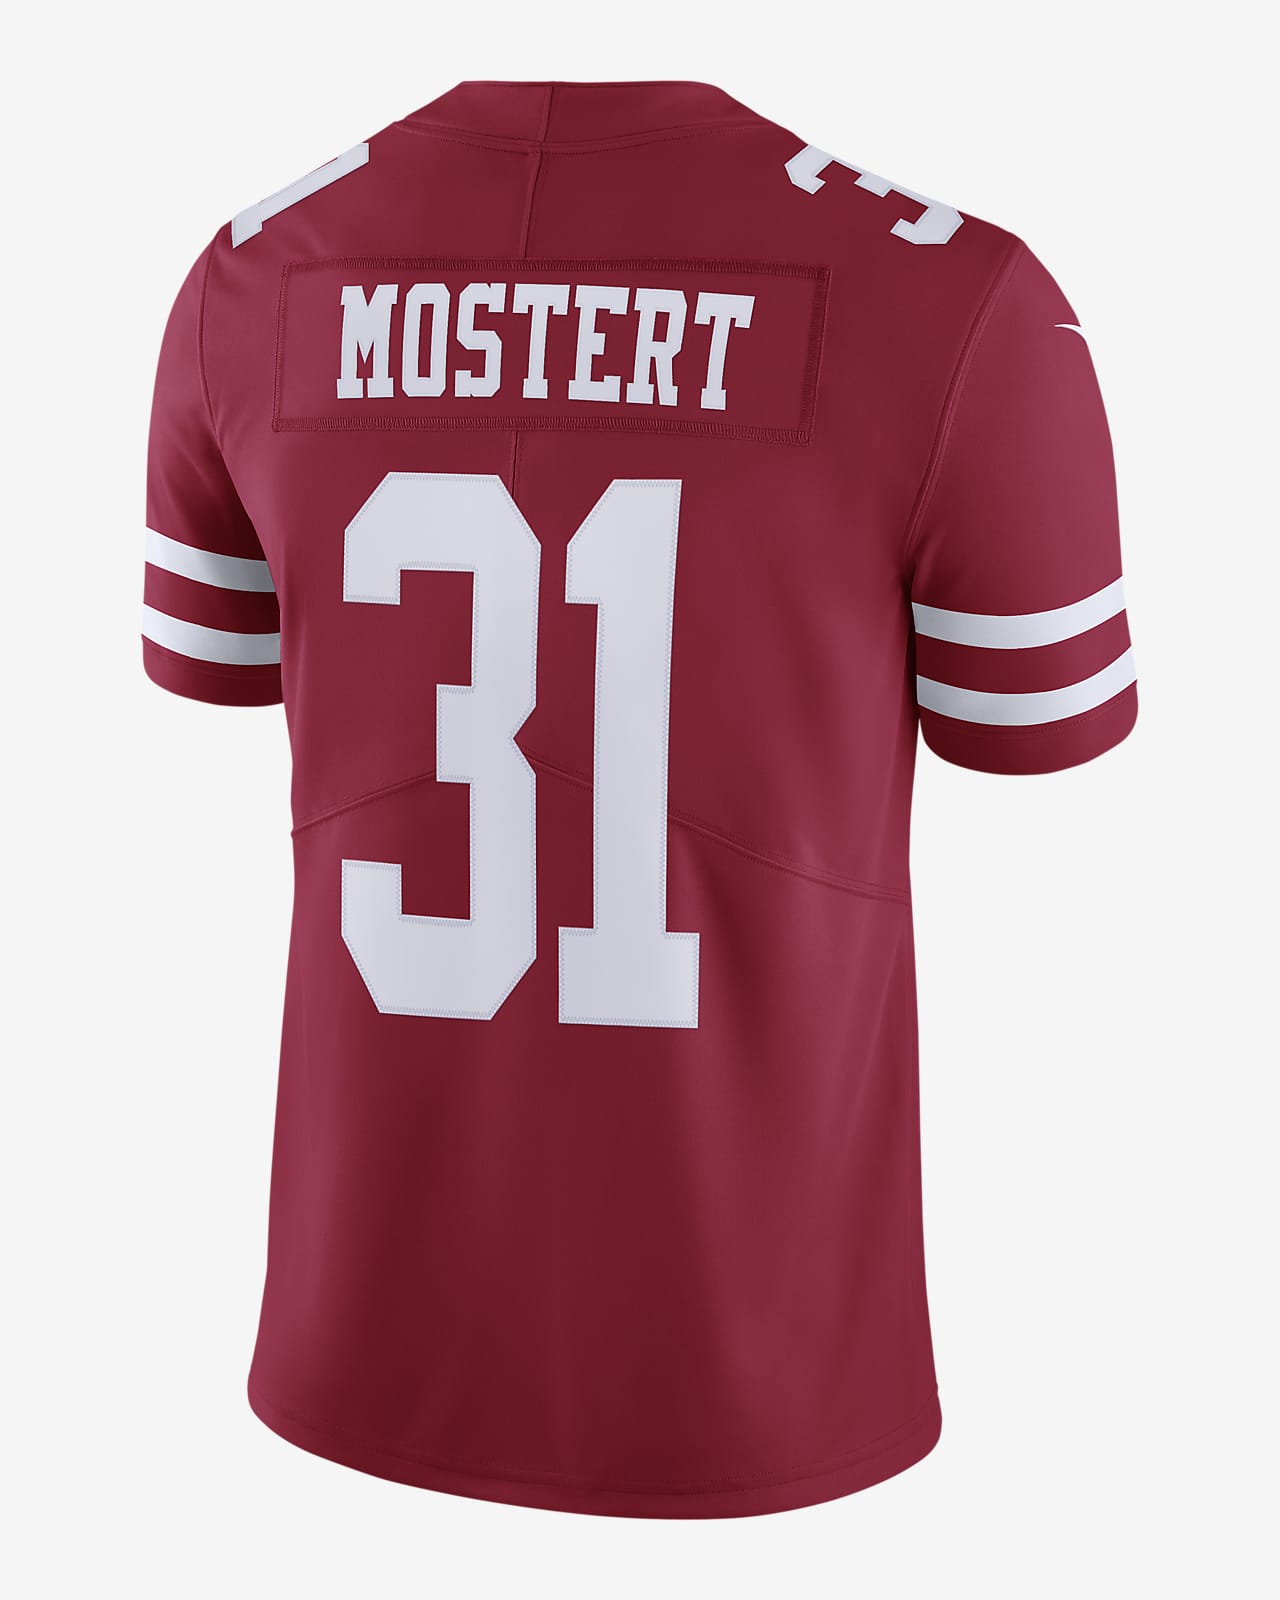 49ers nike jersey authentic